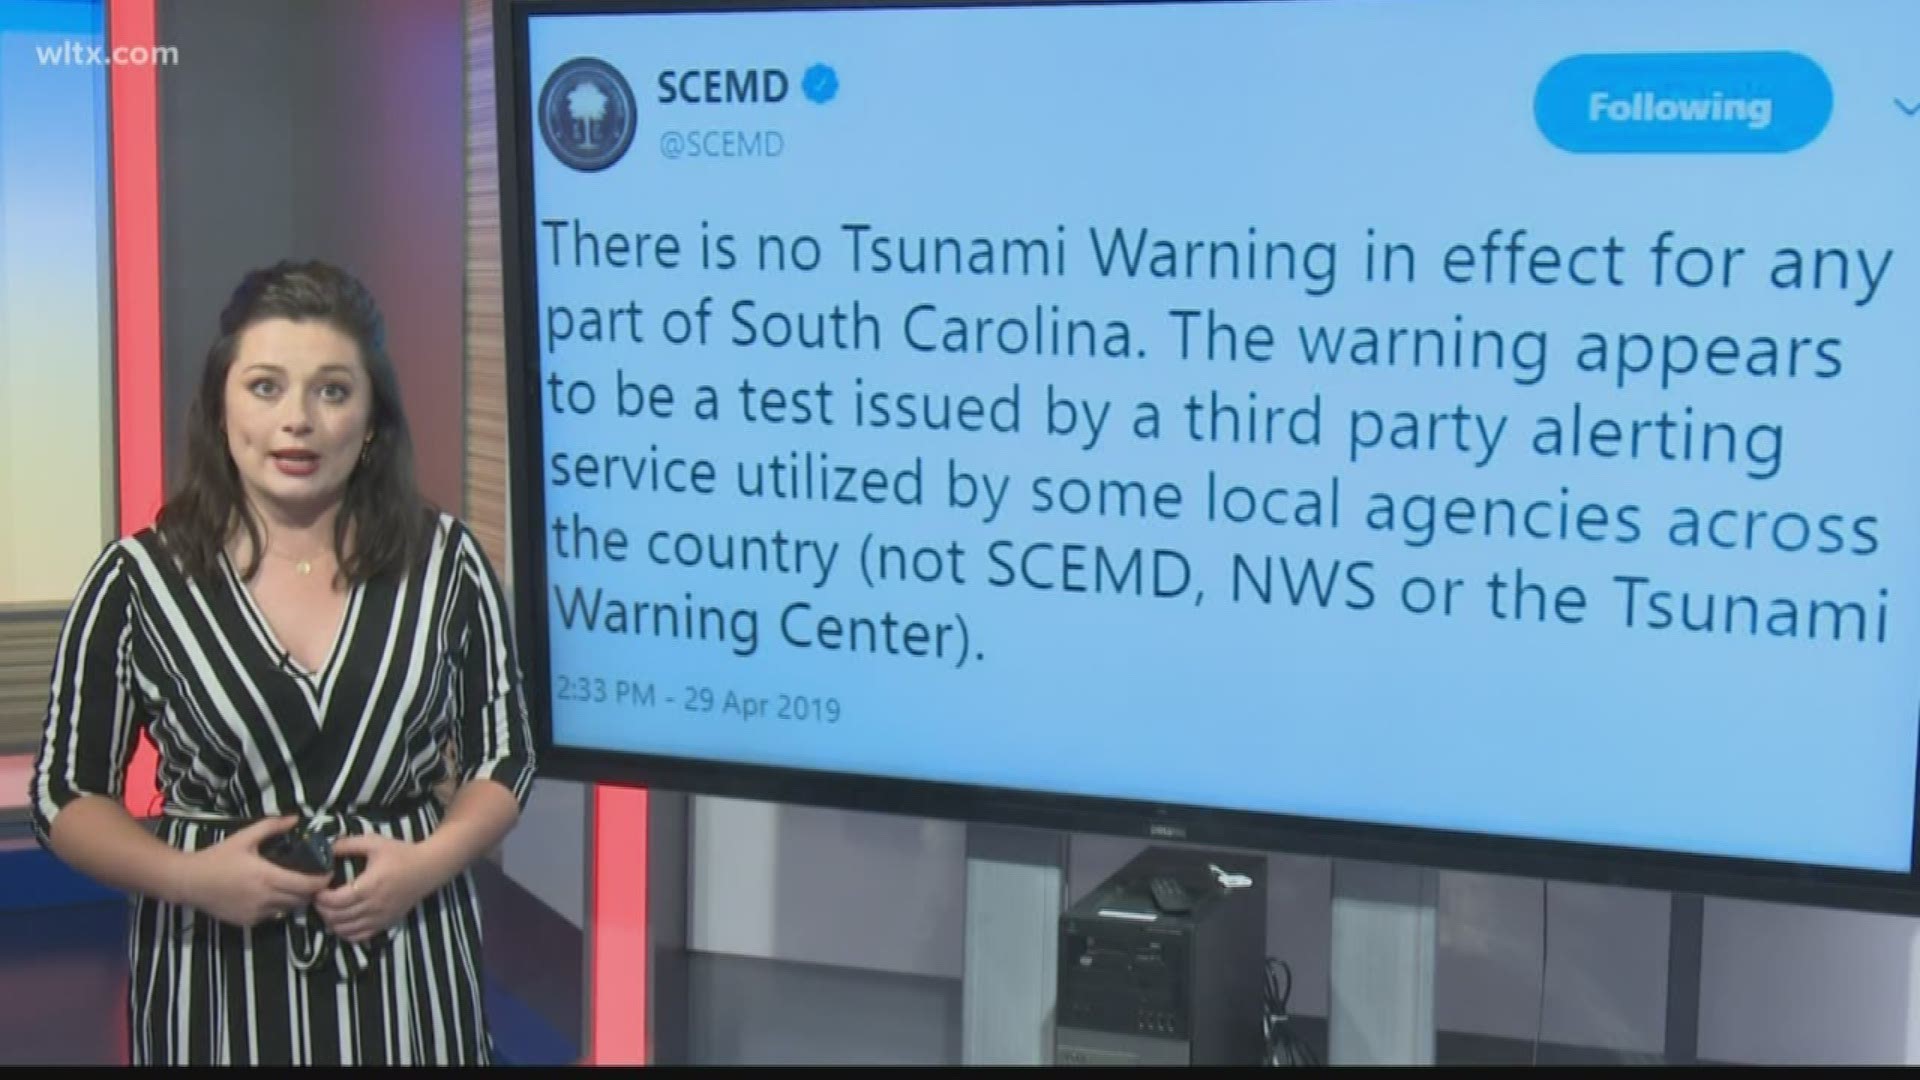 A surprising alert for some folks along the coast.